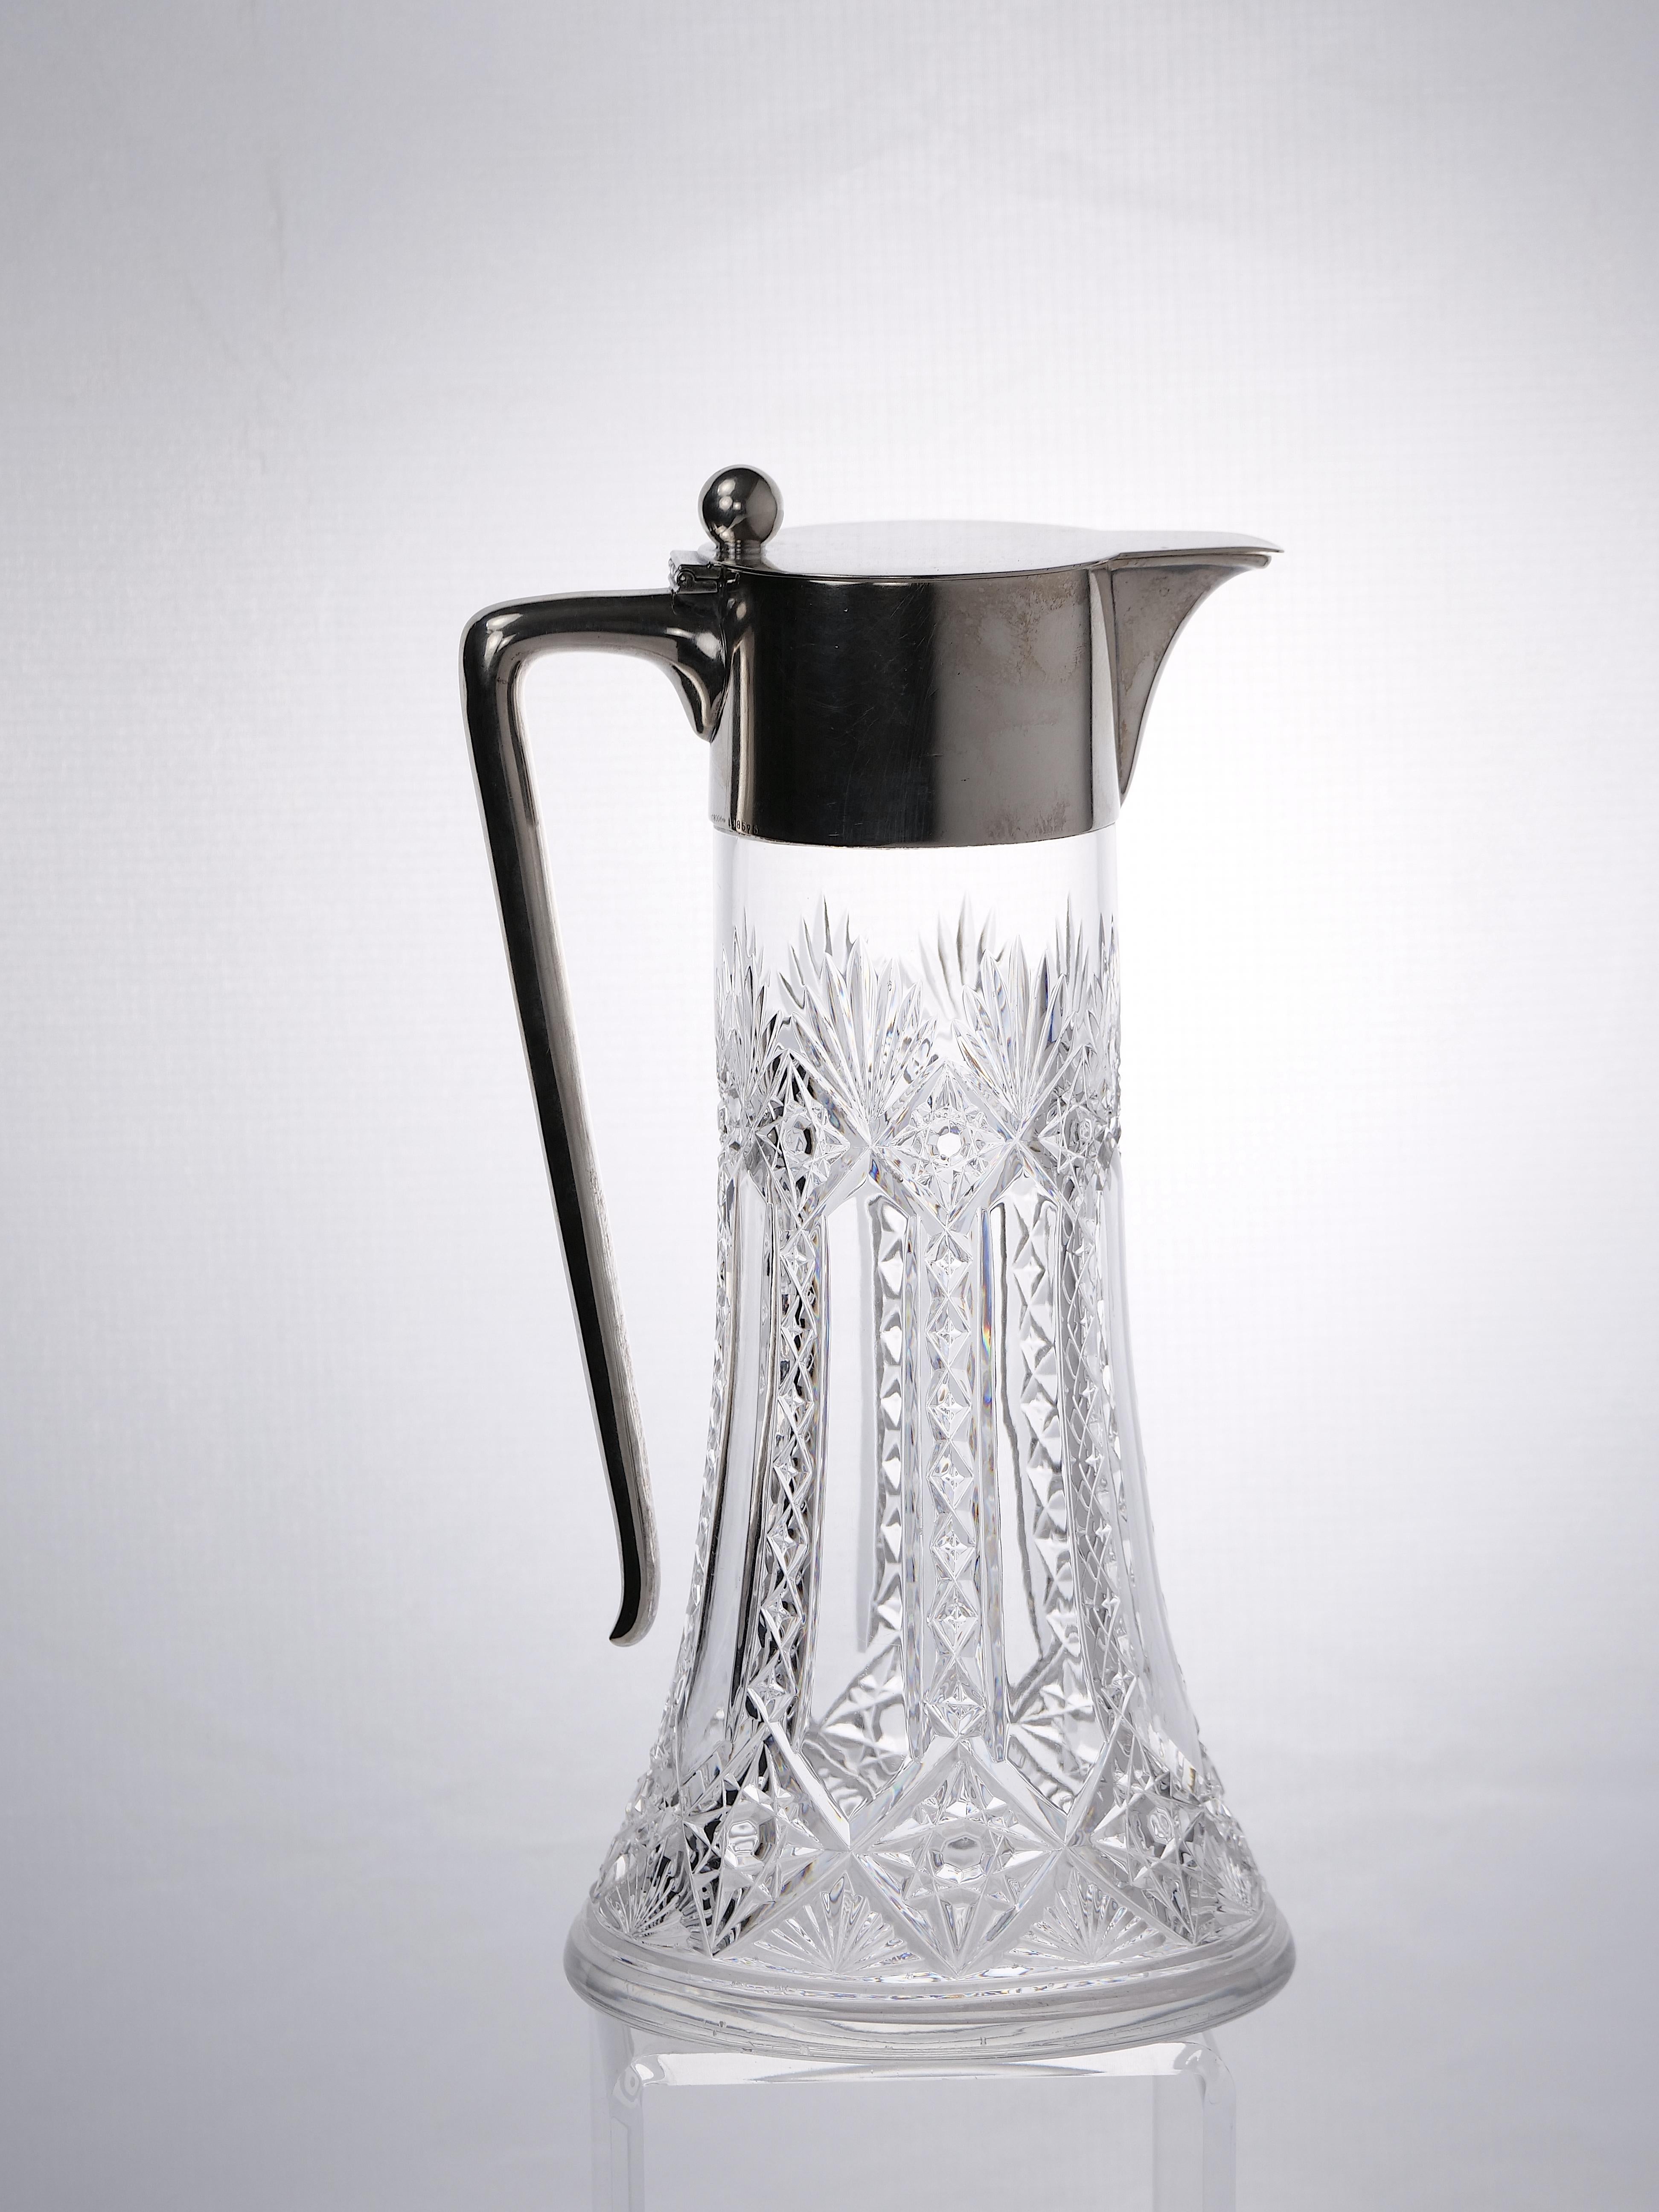 Late 19th century cut glass and sterling silver tableware / barware serving claret jug. The pitcher is hallmarked by an unknown maker, but clearly originated from Italy since it's 800 and dates to approximately the late 19th century and done in the